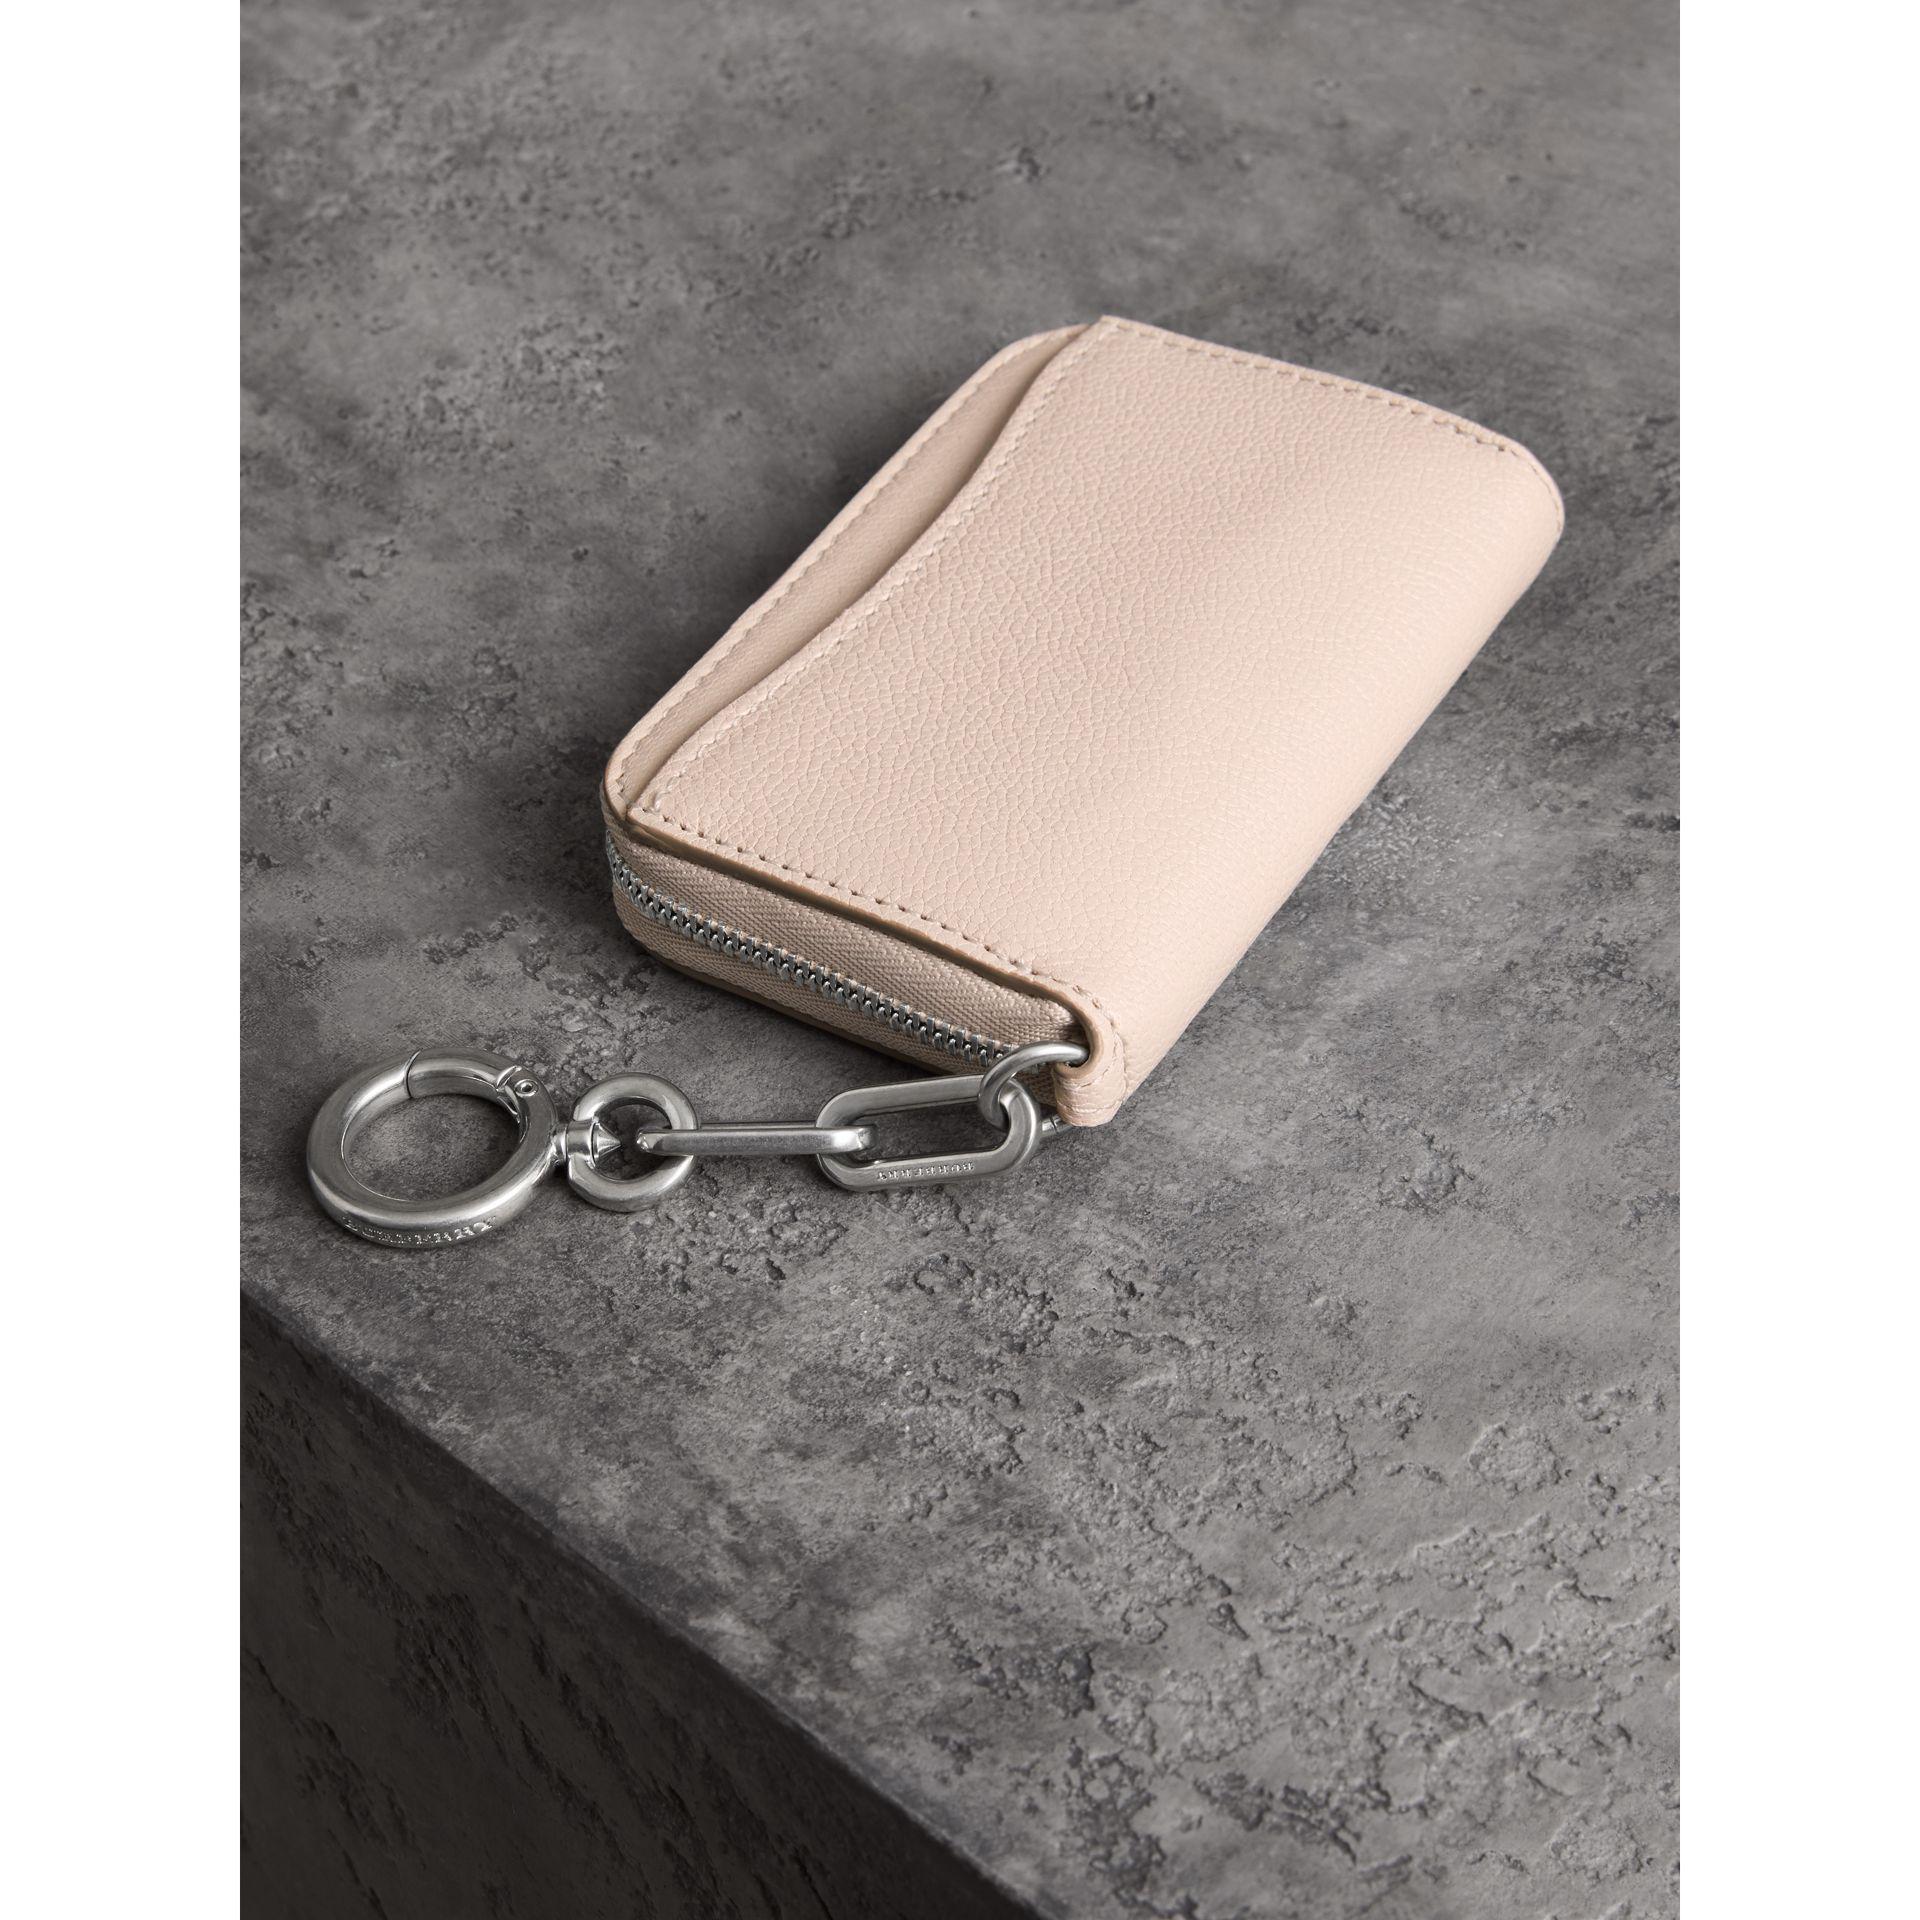 burberry link detail leather ziparound wallet